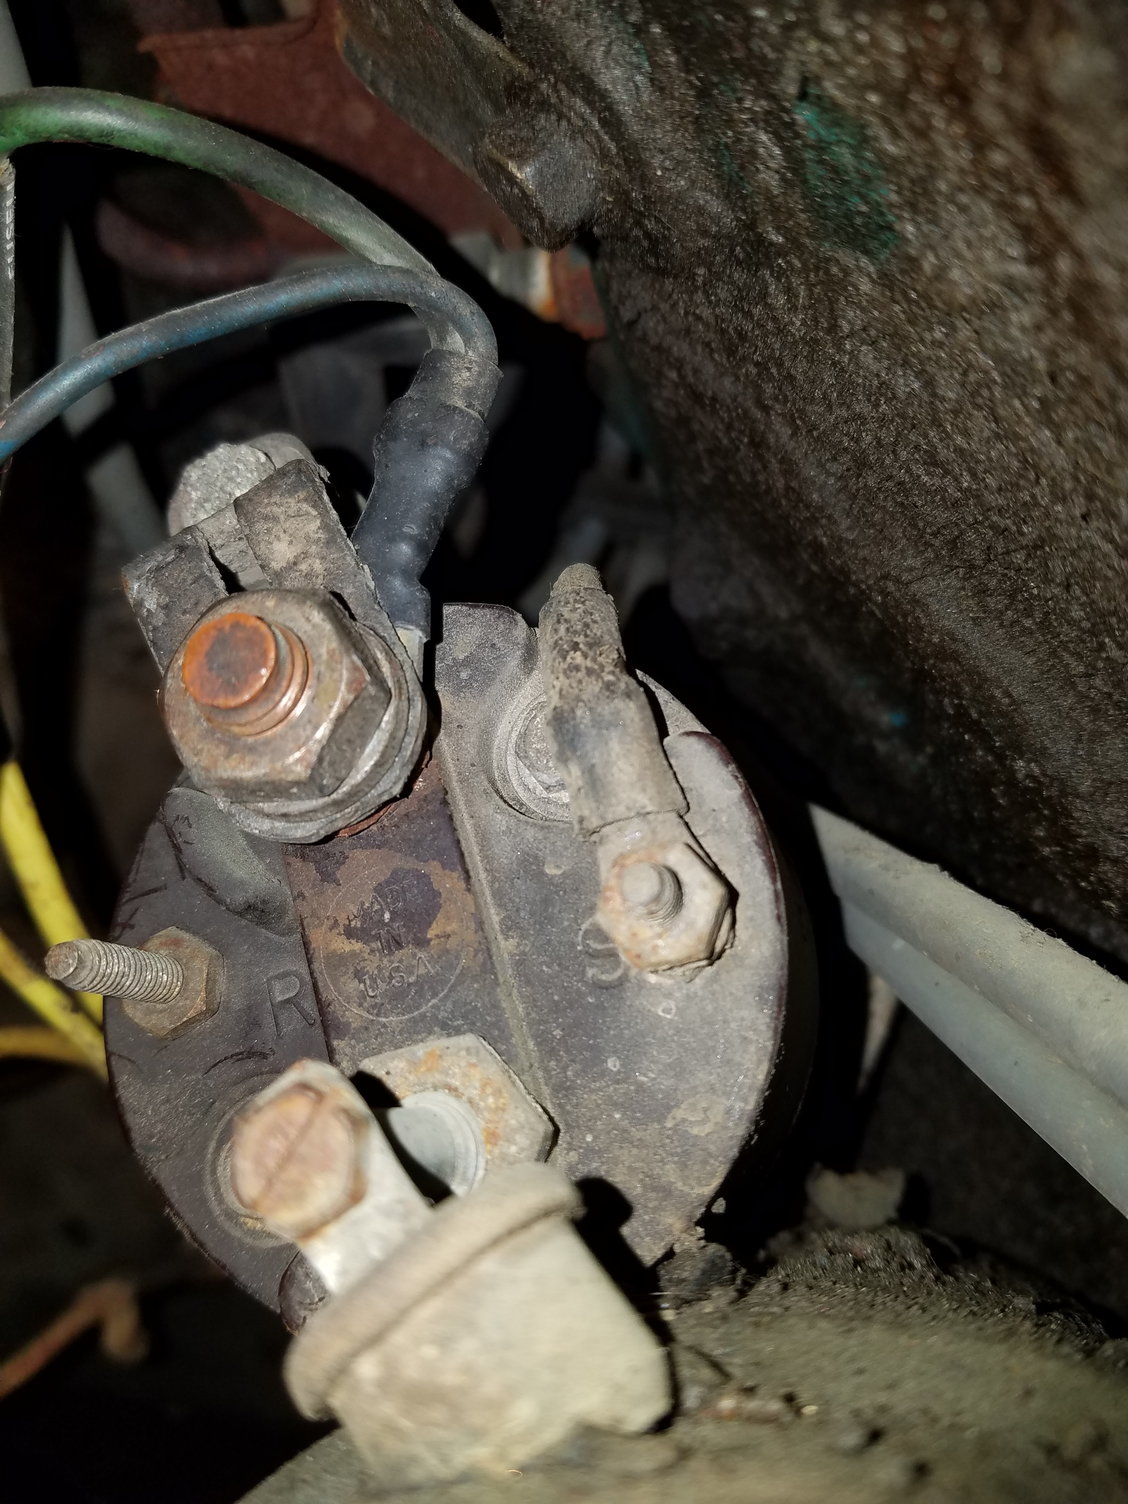 1977 Starter Wiring Issue And